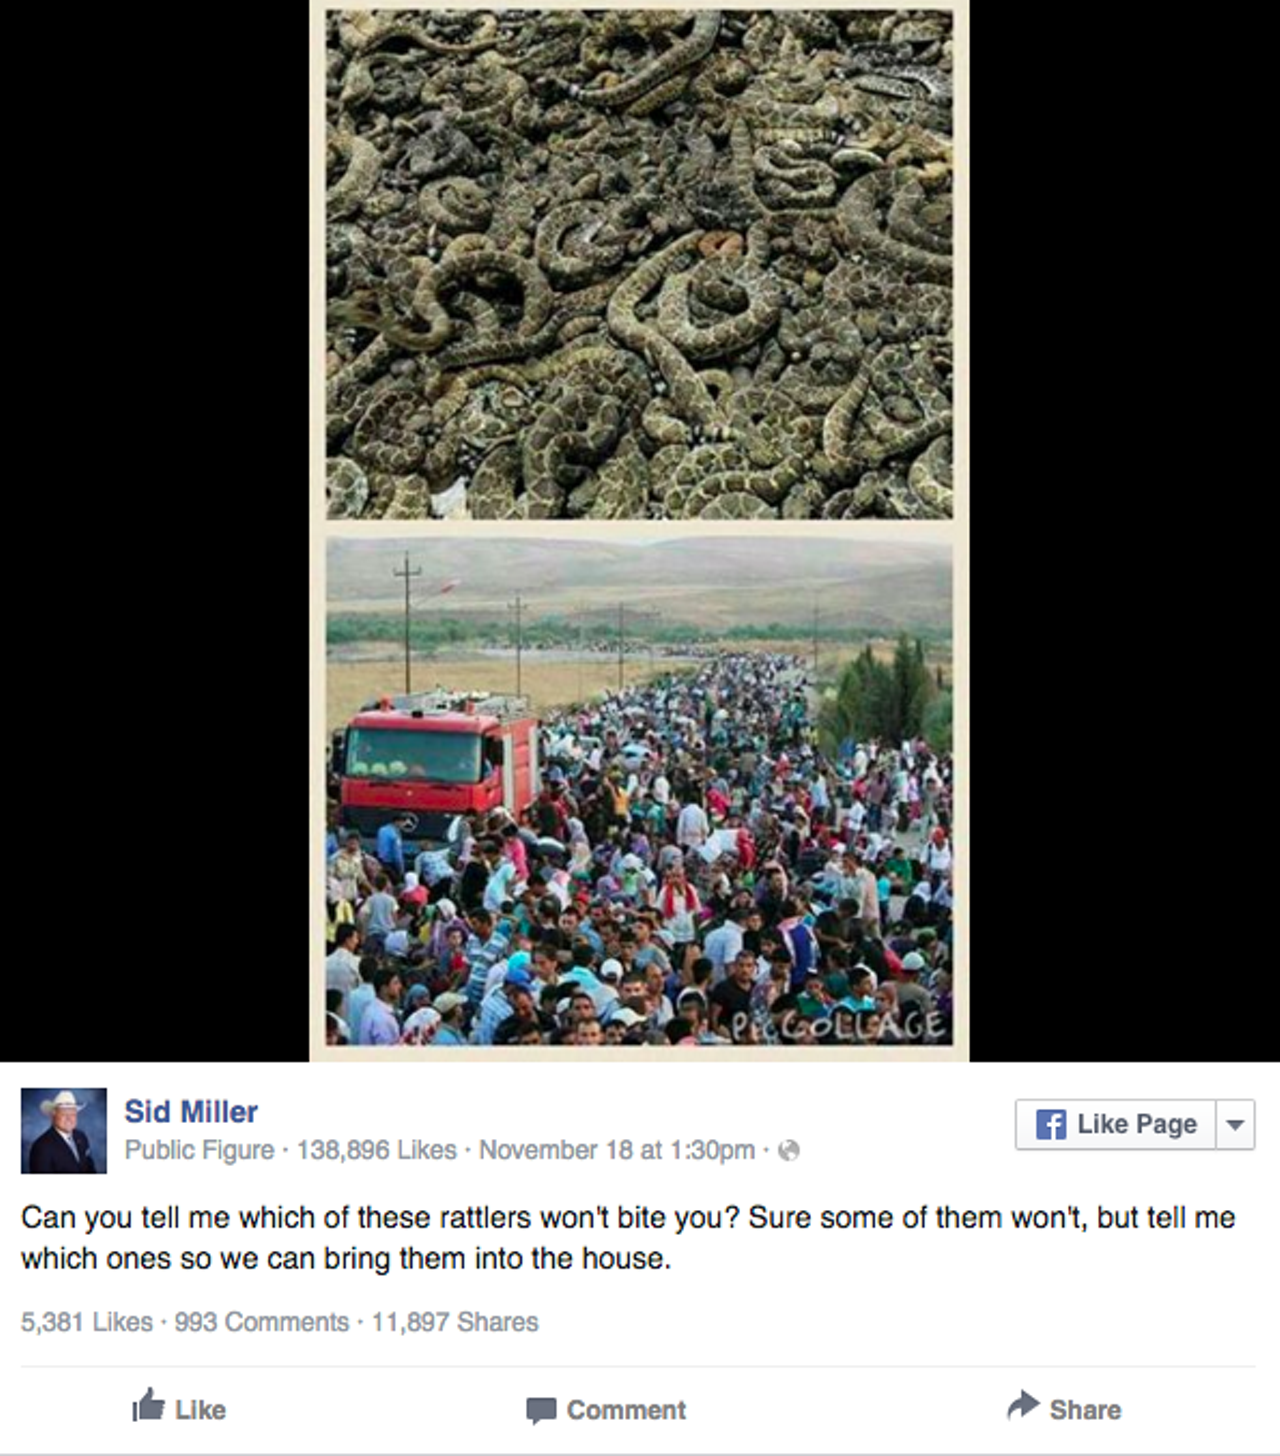 "Can you tell me which of these rattlers won't bite you? Sure some of them won't, but tell me which ones so we can bring them into the house.: -- Agriculture Commissioner Sid Miller in a November 18 Facebook post comparing Syrian refugees to rattlesnakes.